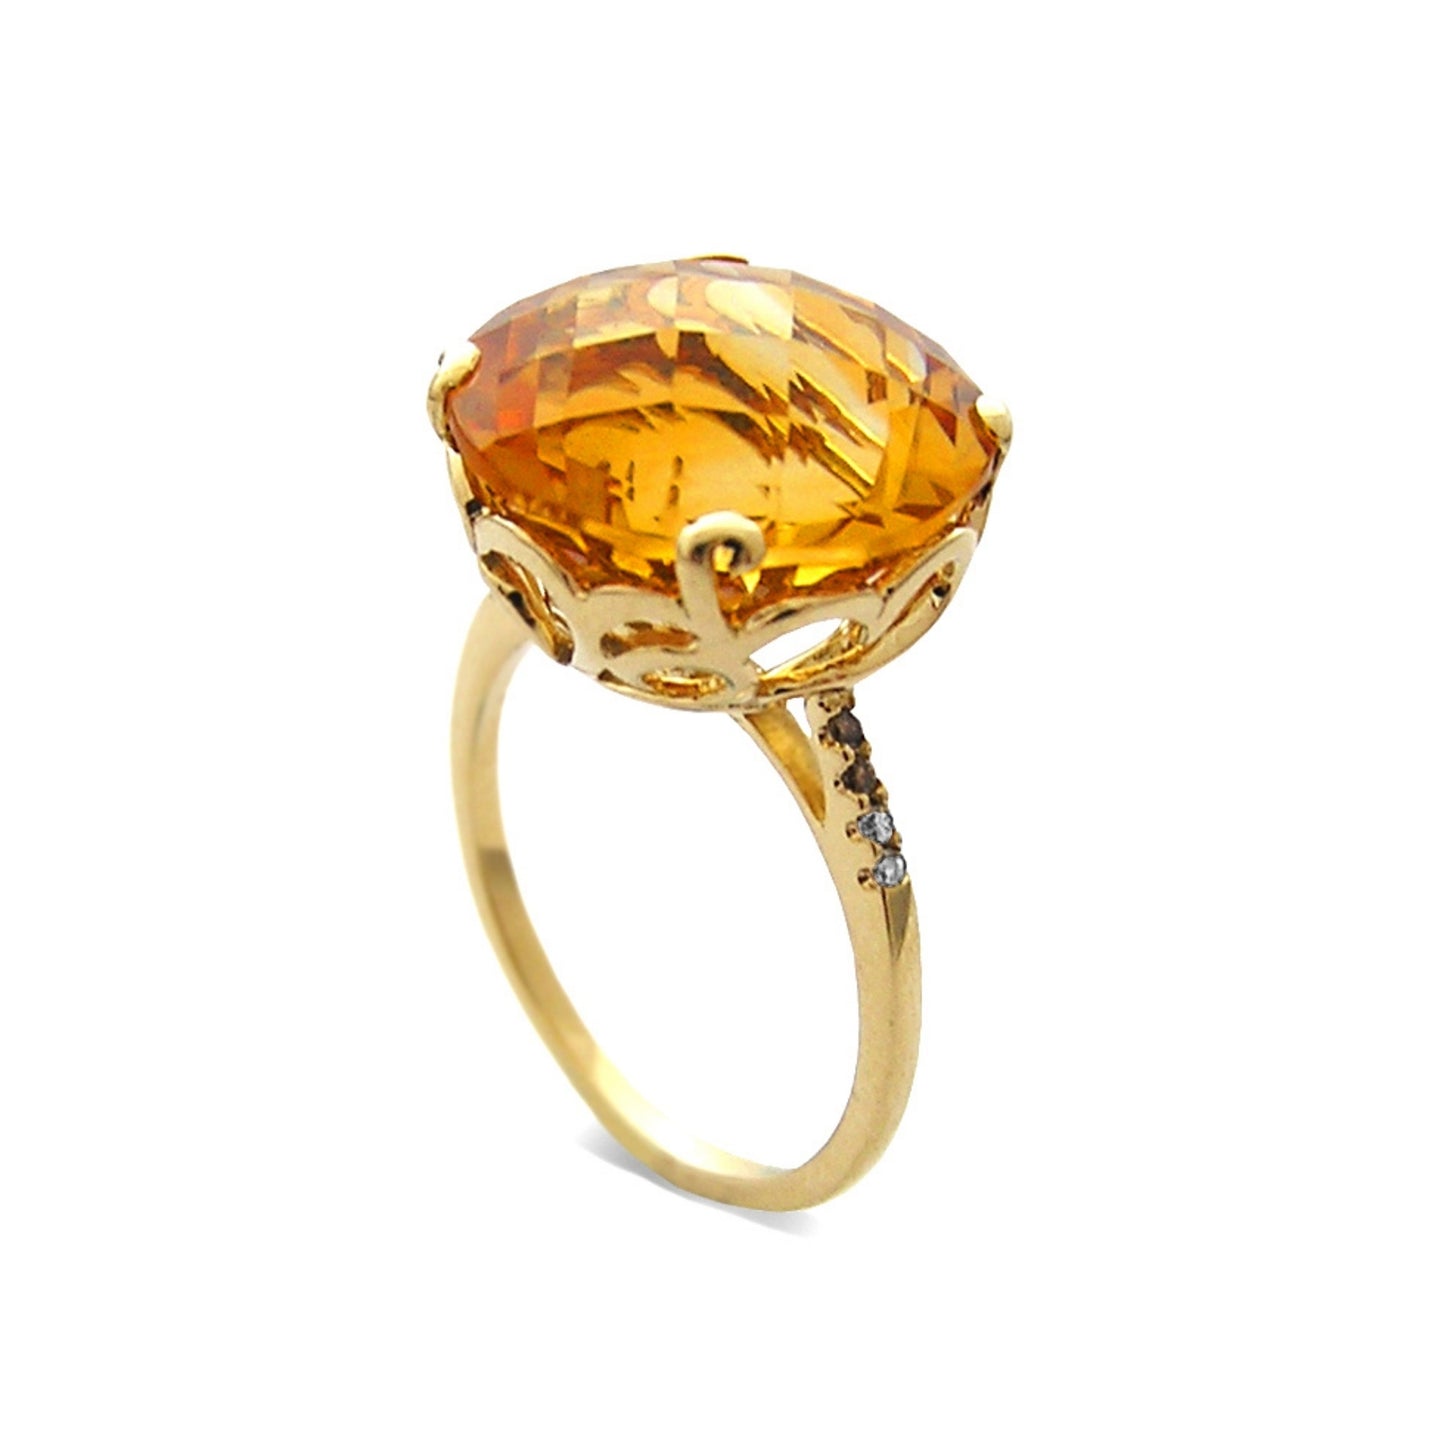 Whispering Large Round Stone Cocktail Ring